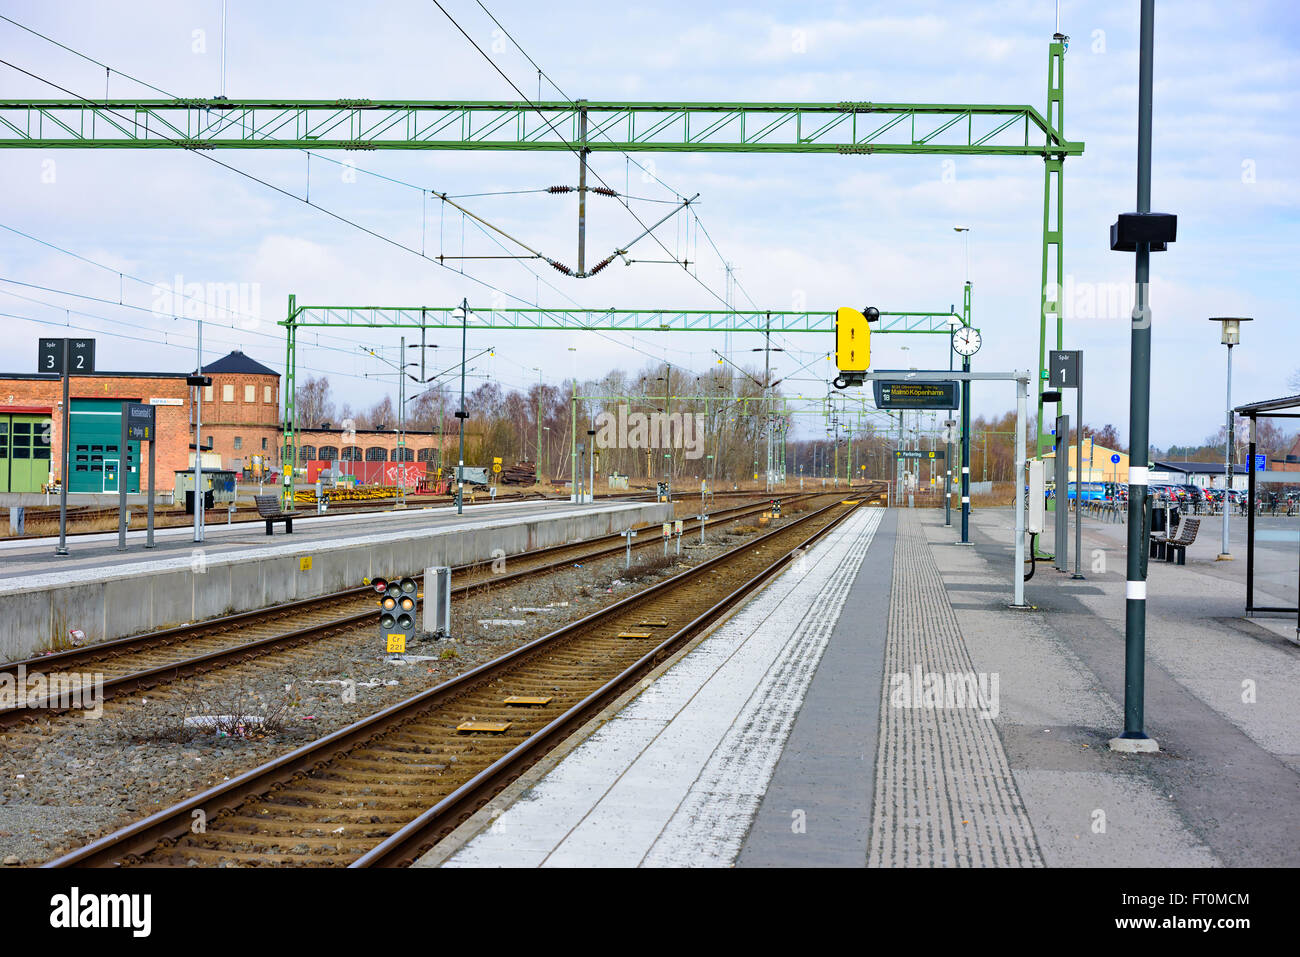 Kristianstad, Sweden - March 20, 2016: The empty and desolate platform at the train station on a Sunday morning. Stock Photo